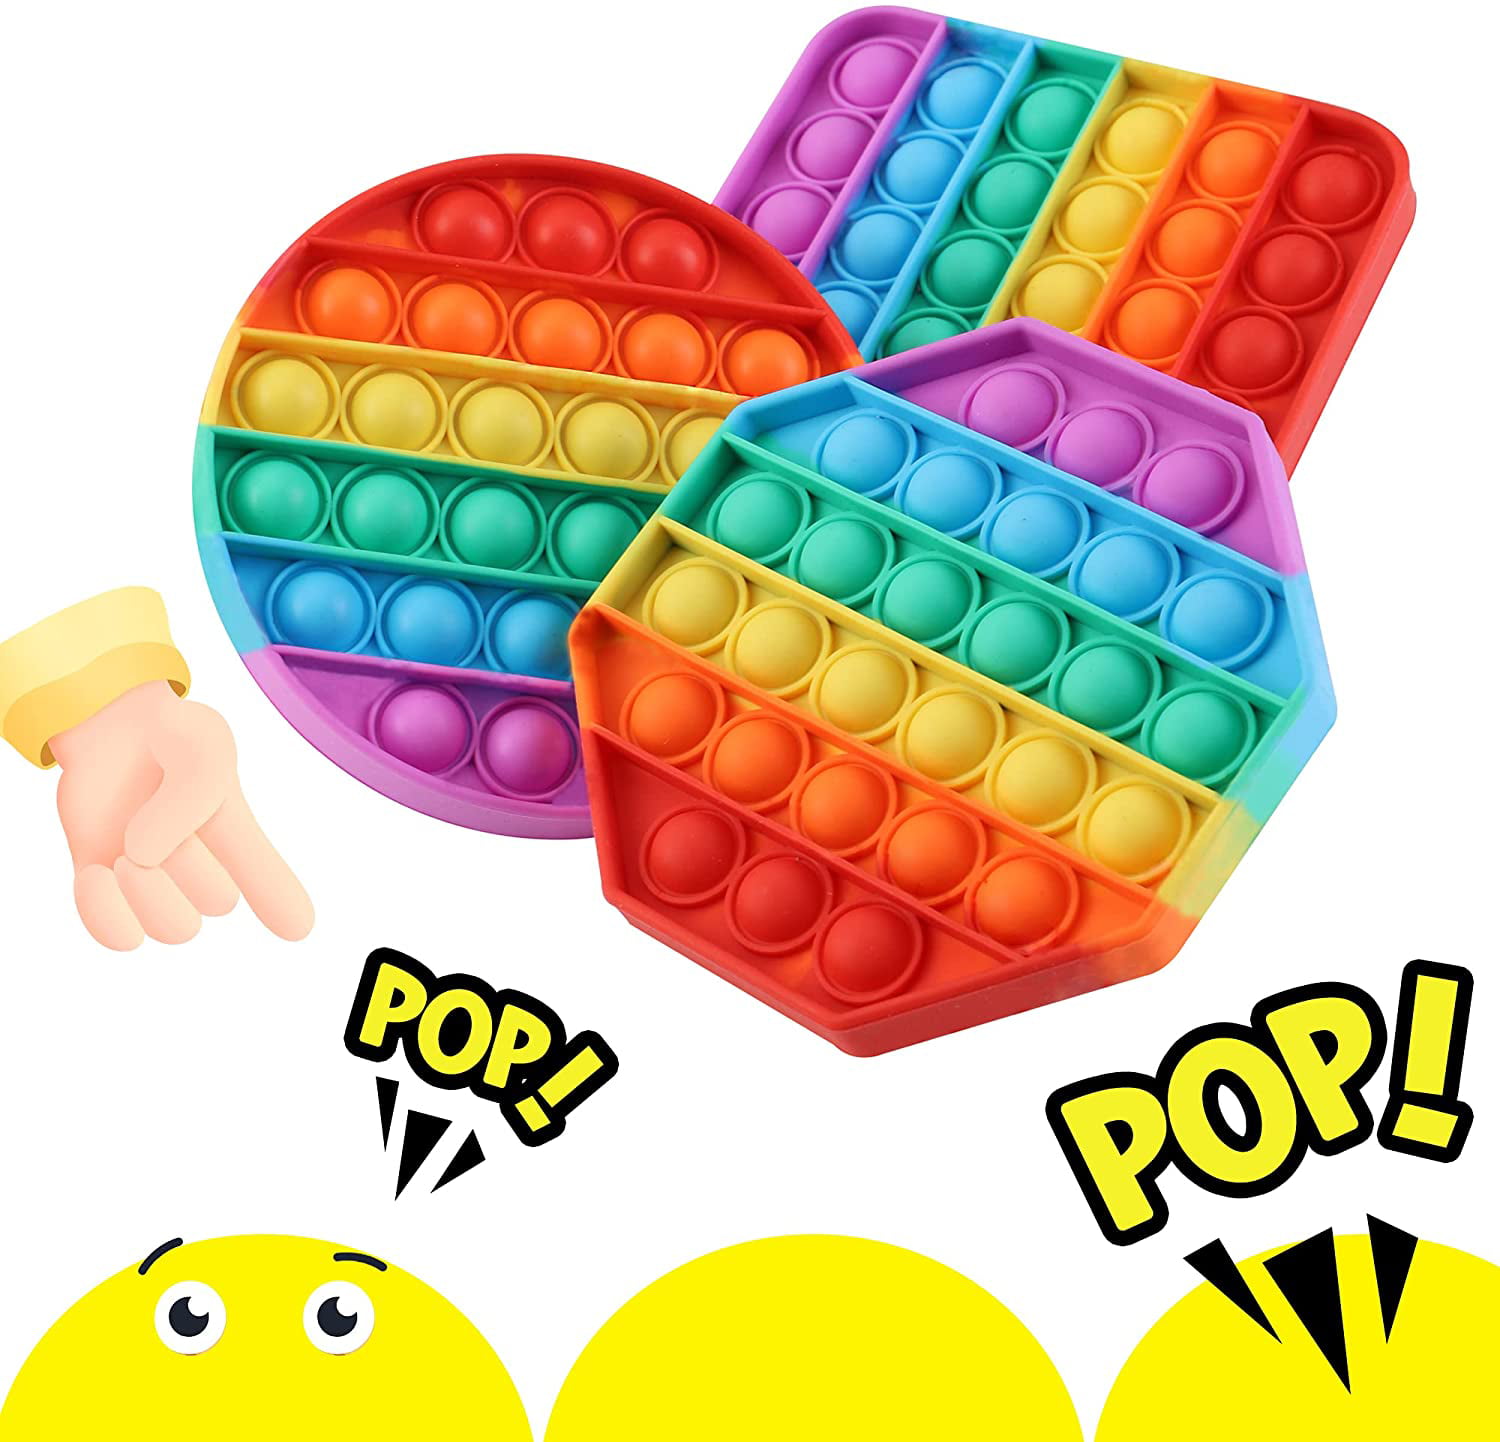 Push Pop Bubble Fidget Toy Stress Reliever Autism Special Needs Silicone Pop It Bubble Fidget Sensory Game Anxiety Relief Toys for Kids Adults 3 Pack 